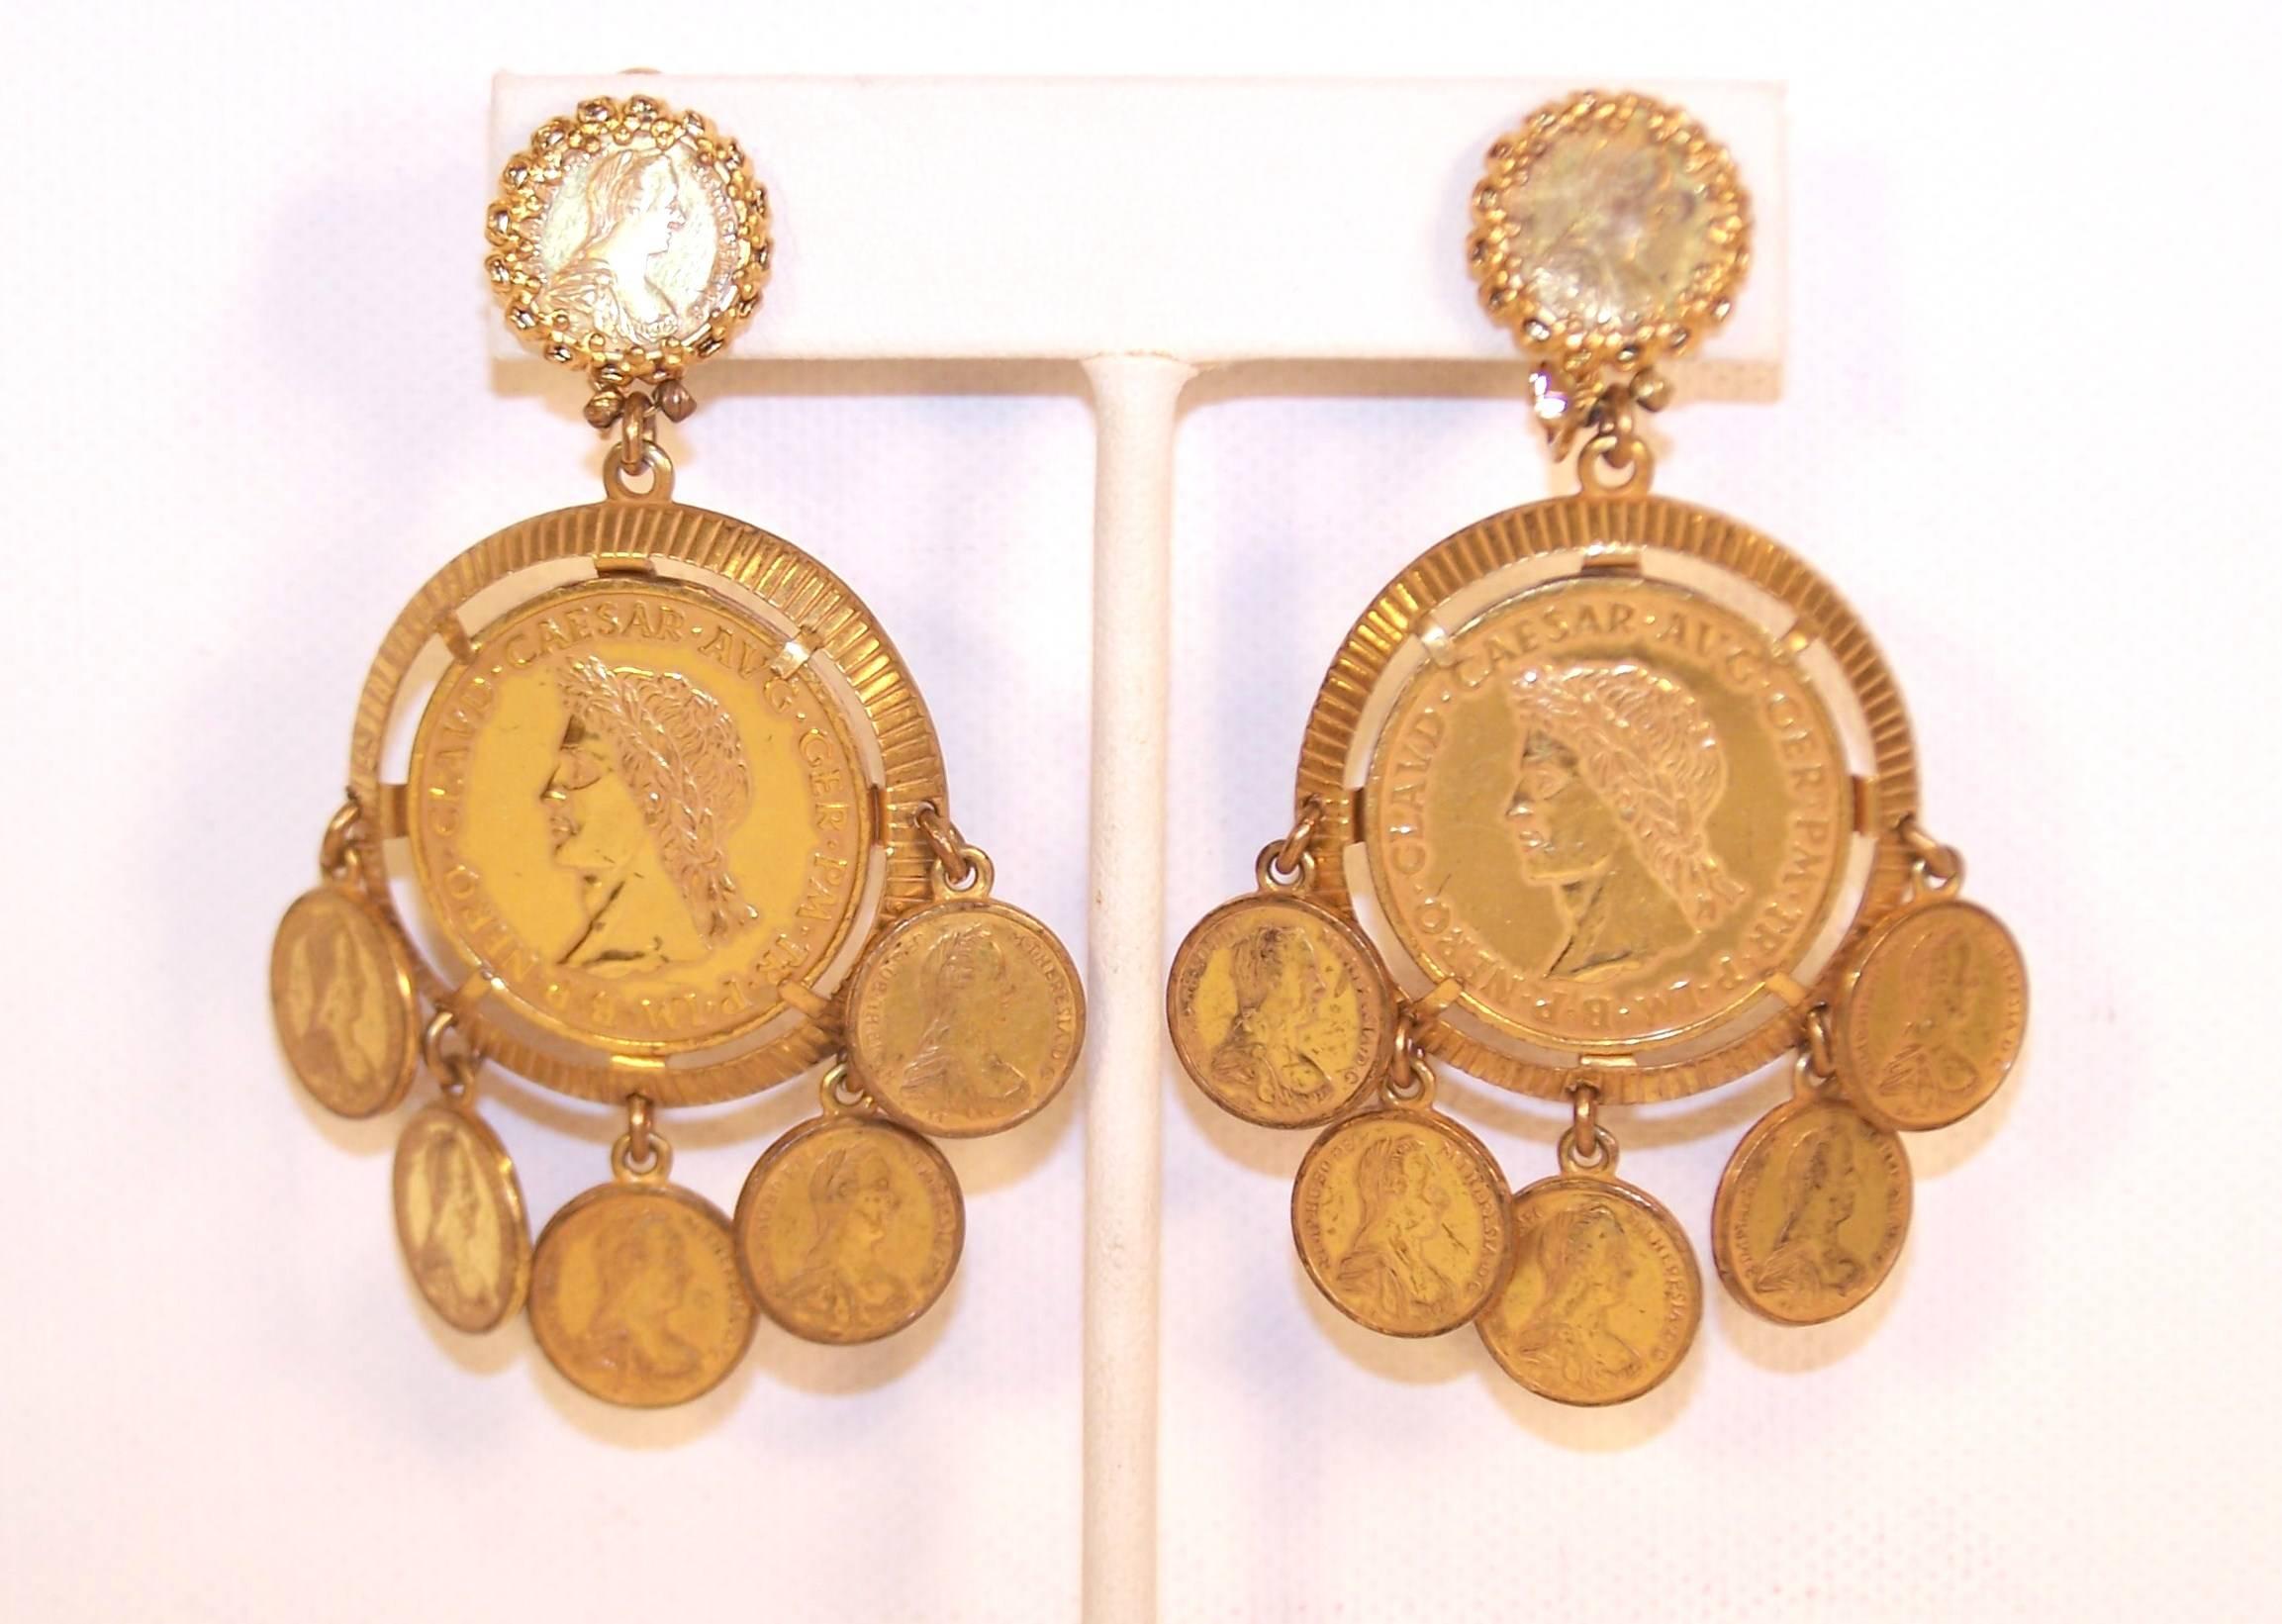 Oh the allure of coin jewelry!  From classic Chanel belts to the exotic style of Mughal crown jewels...coins have been used for fashionable decoration for centuries.  These 1960's earrings from Miriam Haskell are loaded with quality details that